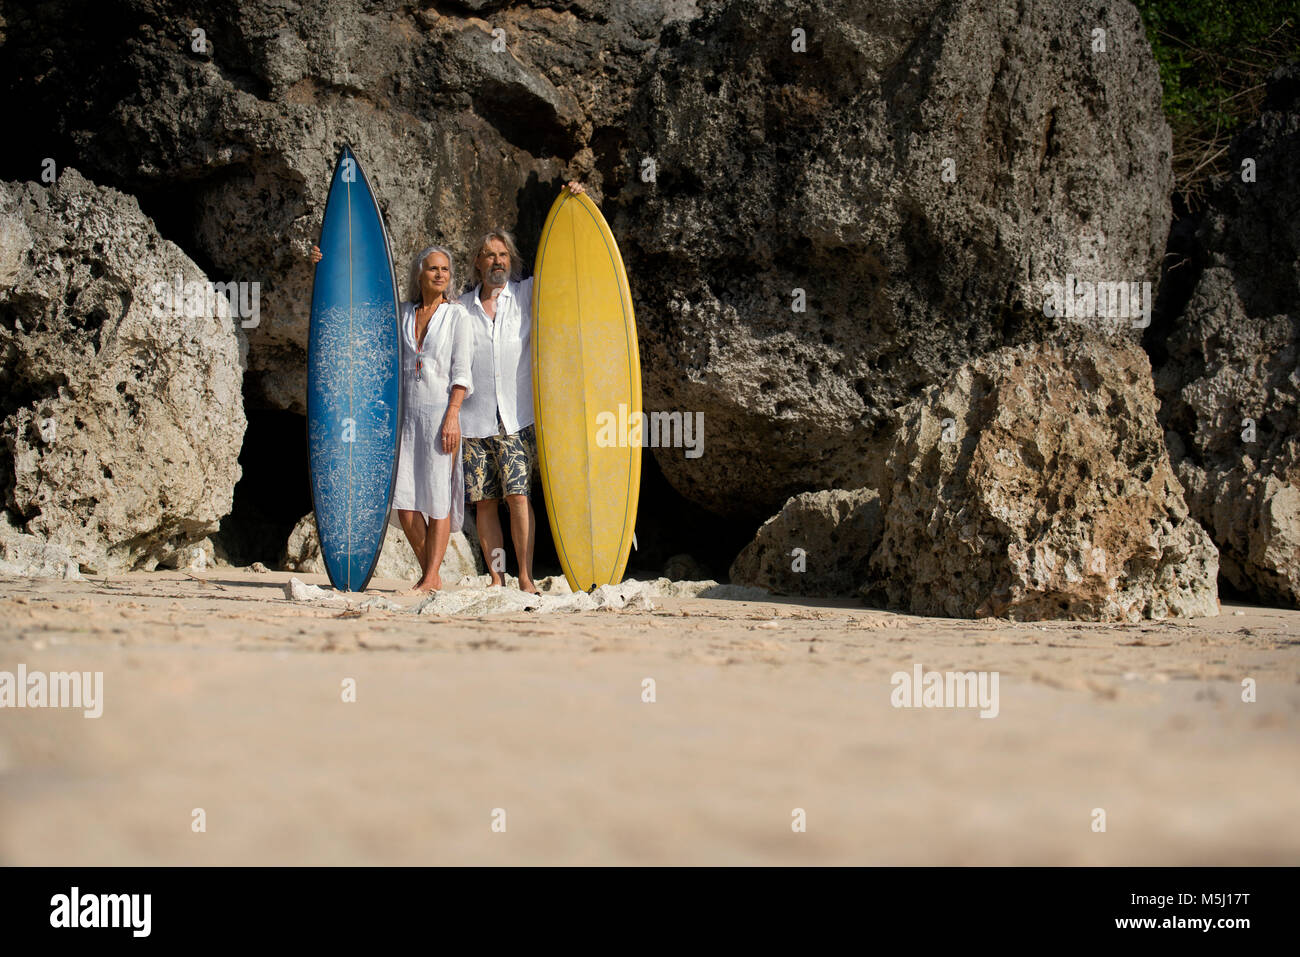 Romantic couple with surfboards at beach Banque D'Images